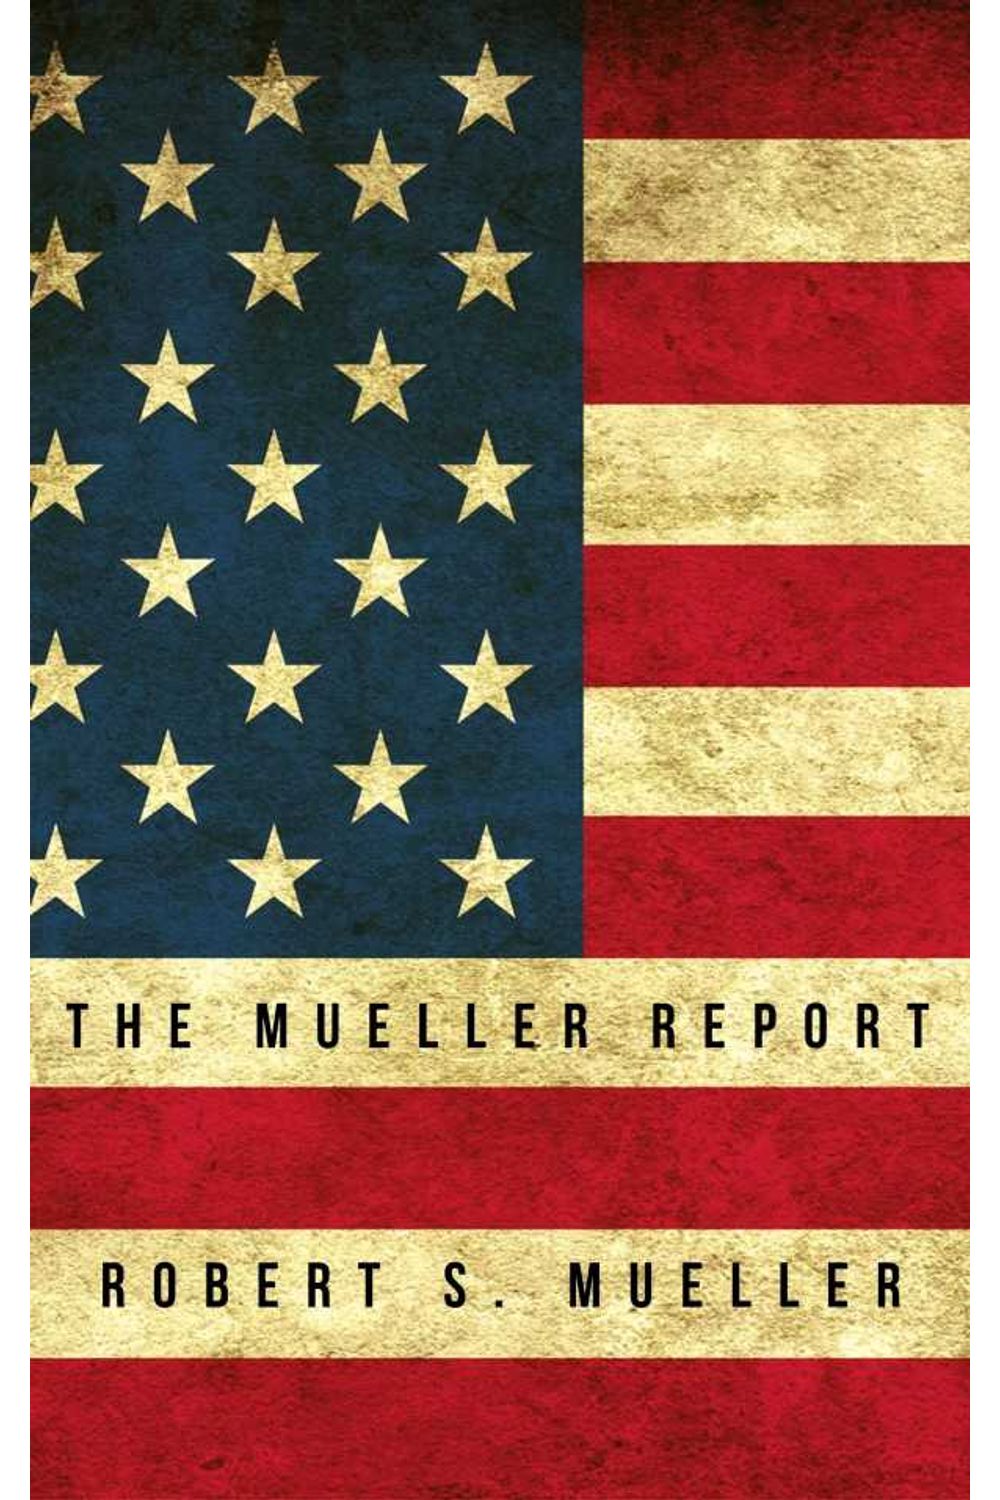 bw-the-mueller-report-report-on-the-investigation-into-russian-interference-in-the-2016-presidential-election-cded-9782291063896